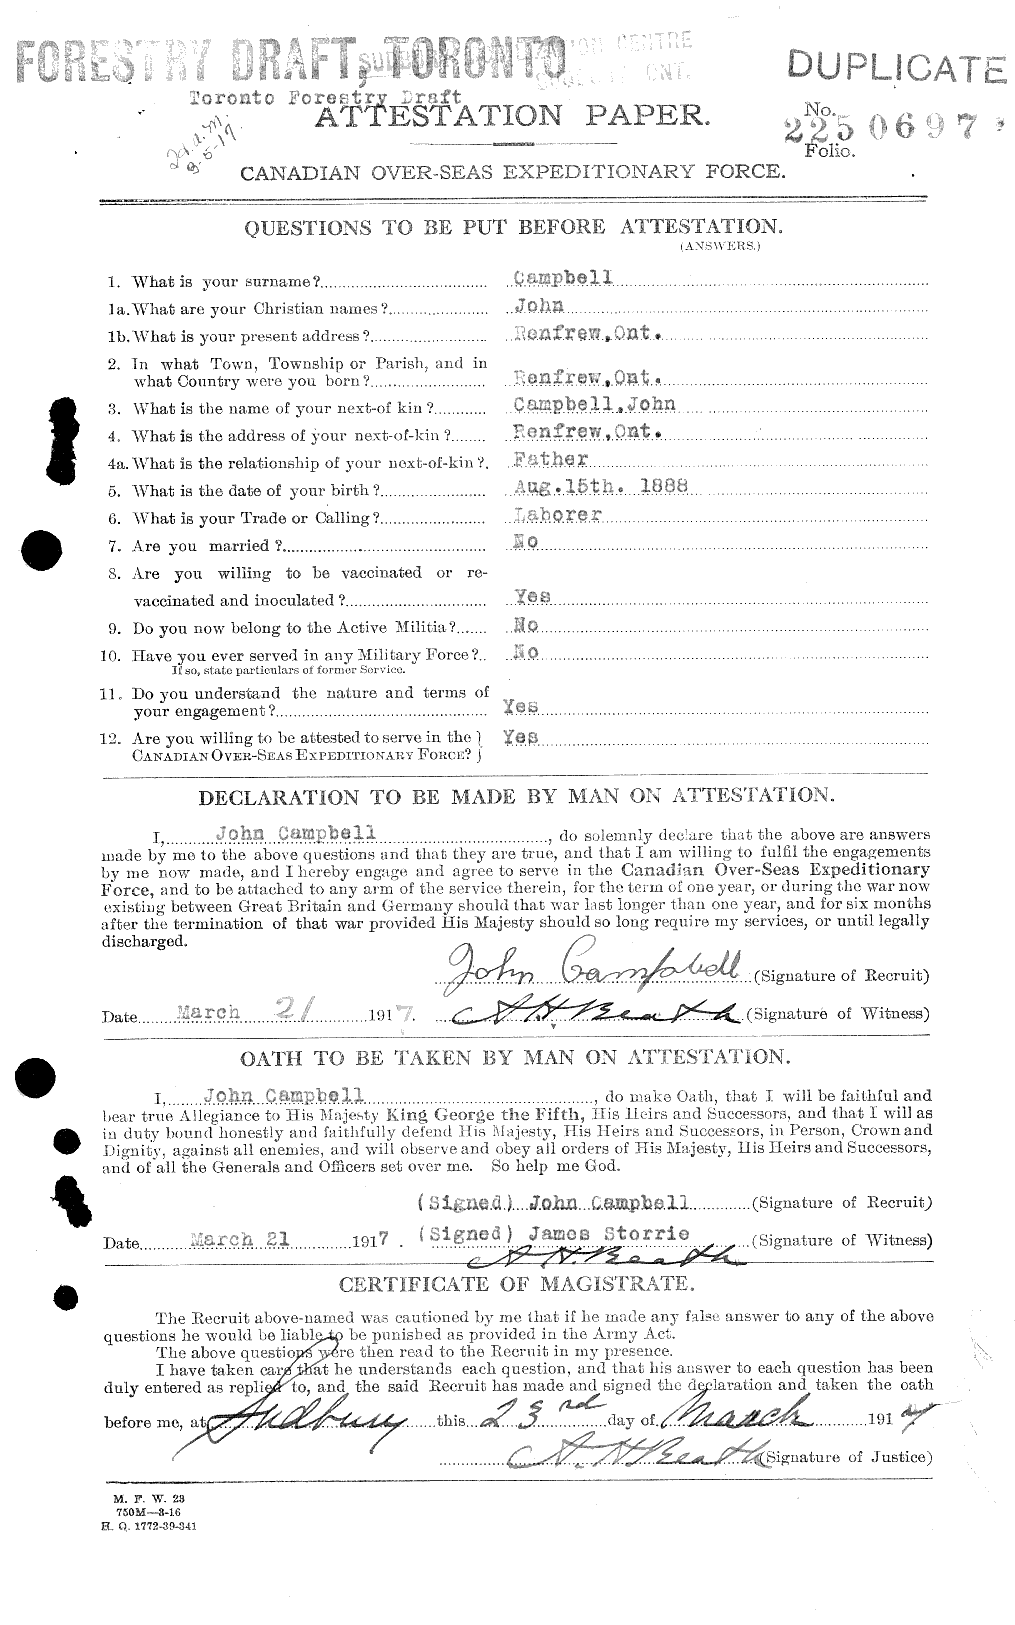 Personnel Records of the First World War - CEF 008485a